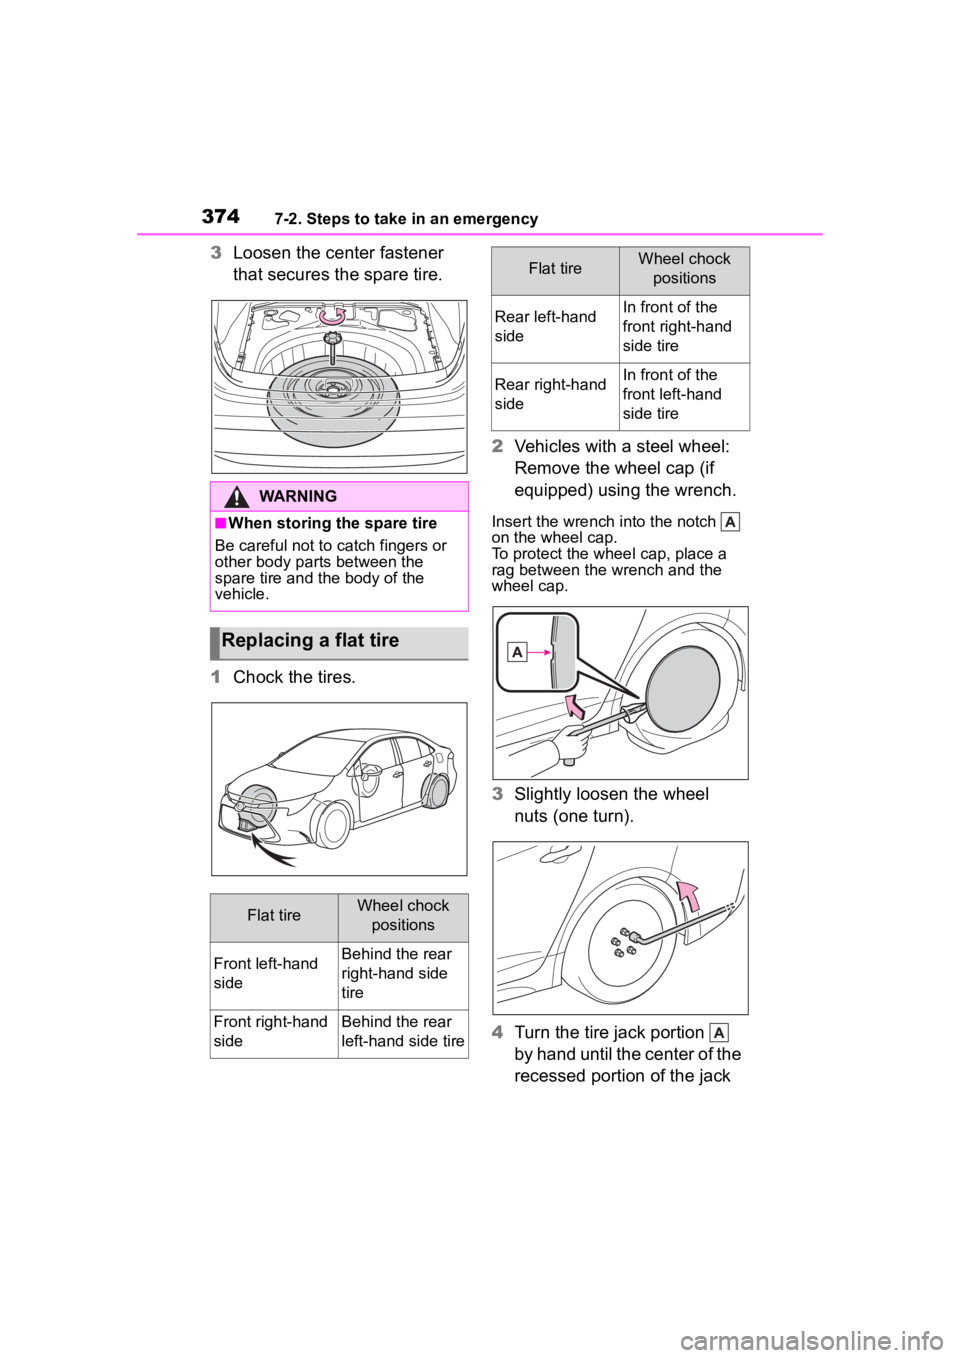 TOYOTA COROLLA 2023  Owners Manual 3747-2. Steps to take in an emergency
3Loosen the center fastener 
that secures the spare tire.
1 Chock the tires. 2
Vehicles with a steel wheel: 
Remove the wheel cap (if 
equipped) using the wrench.